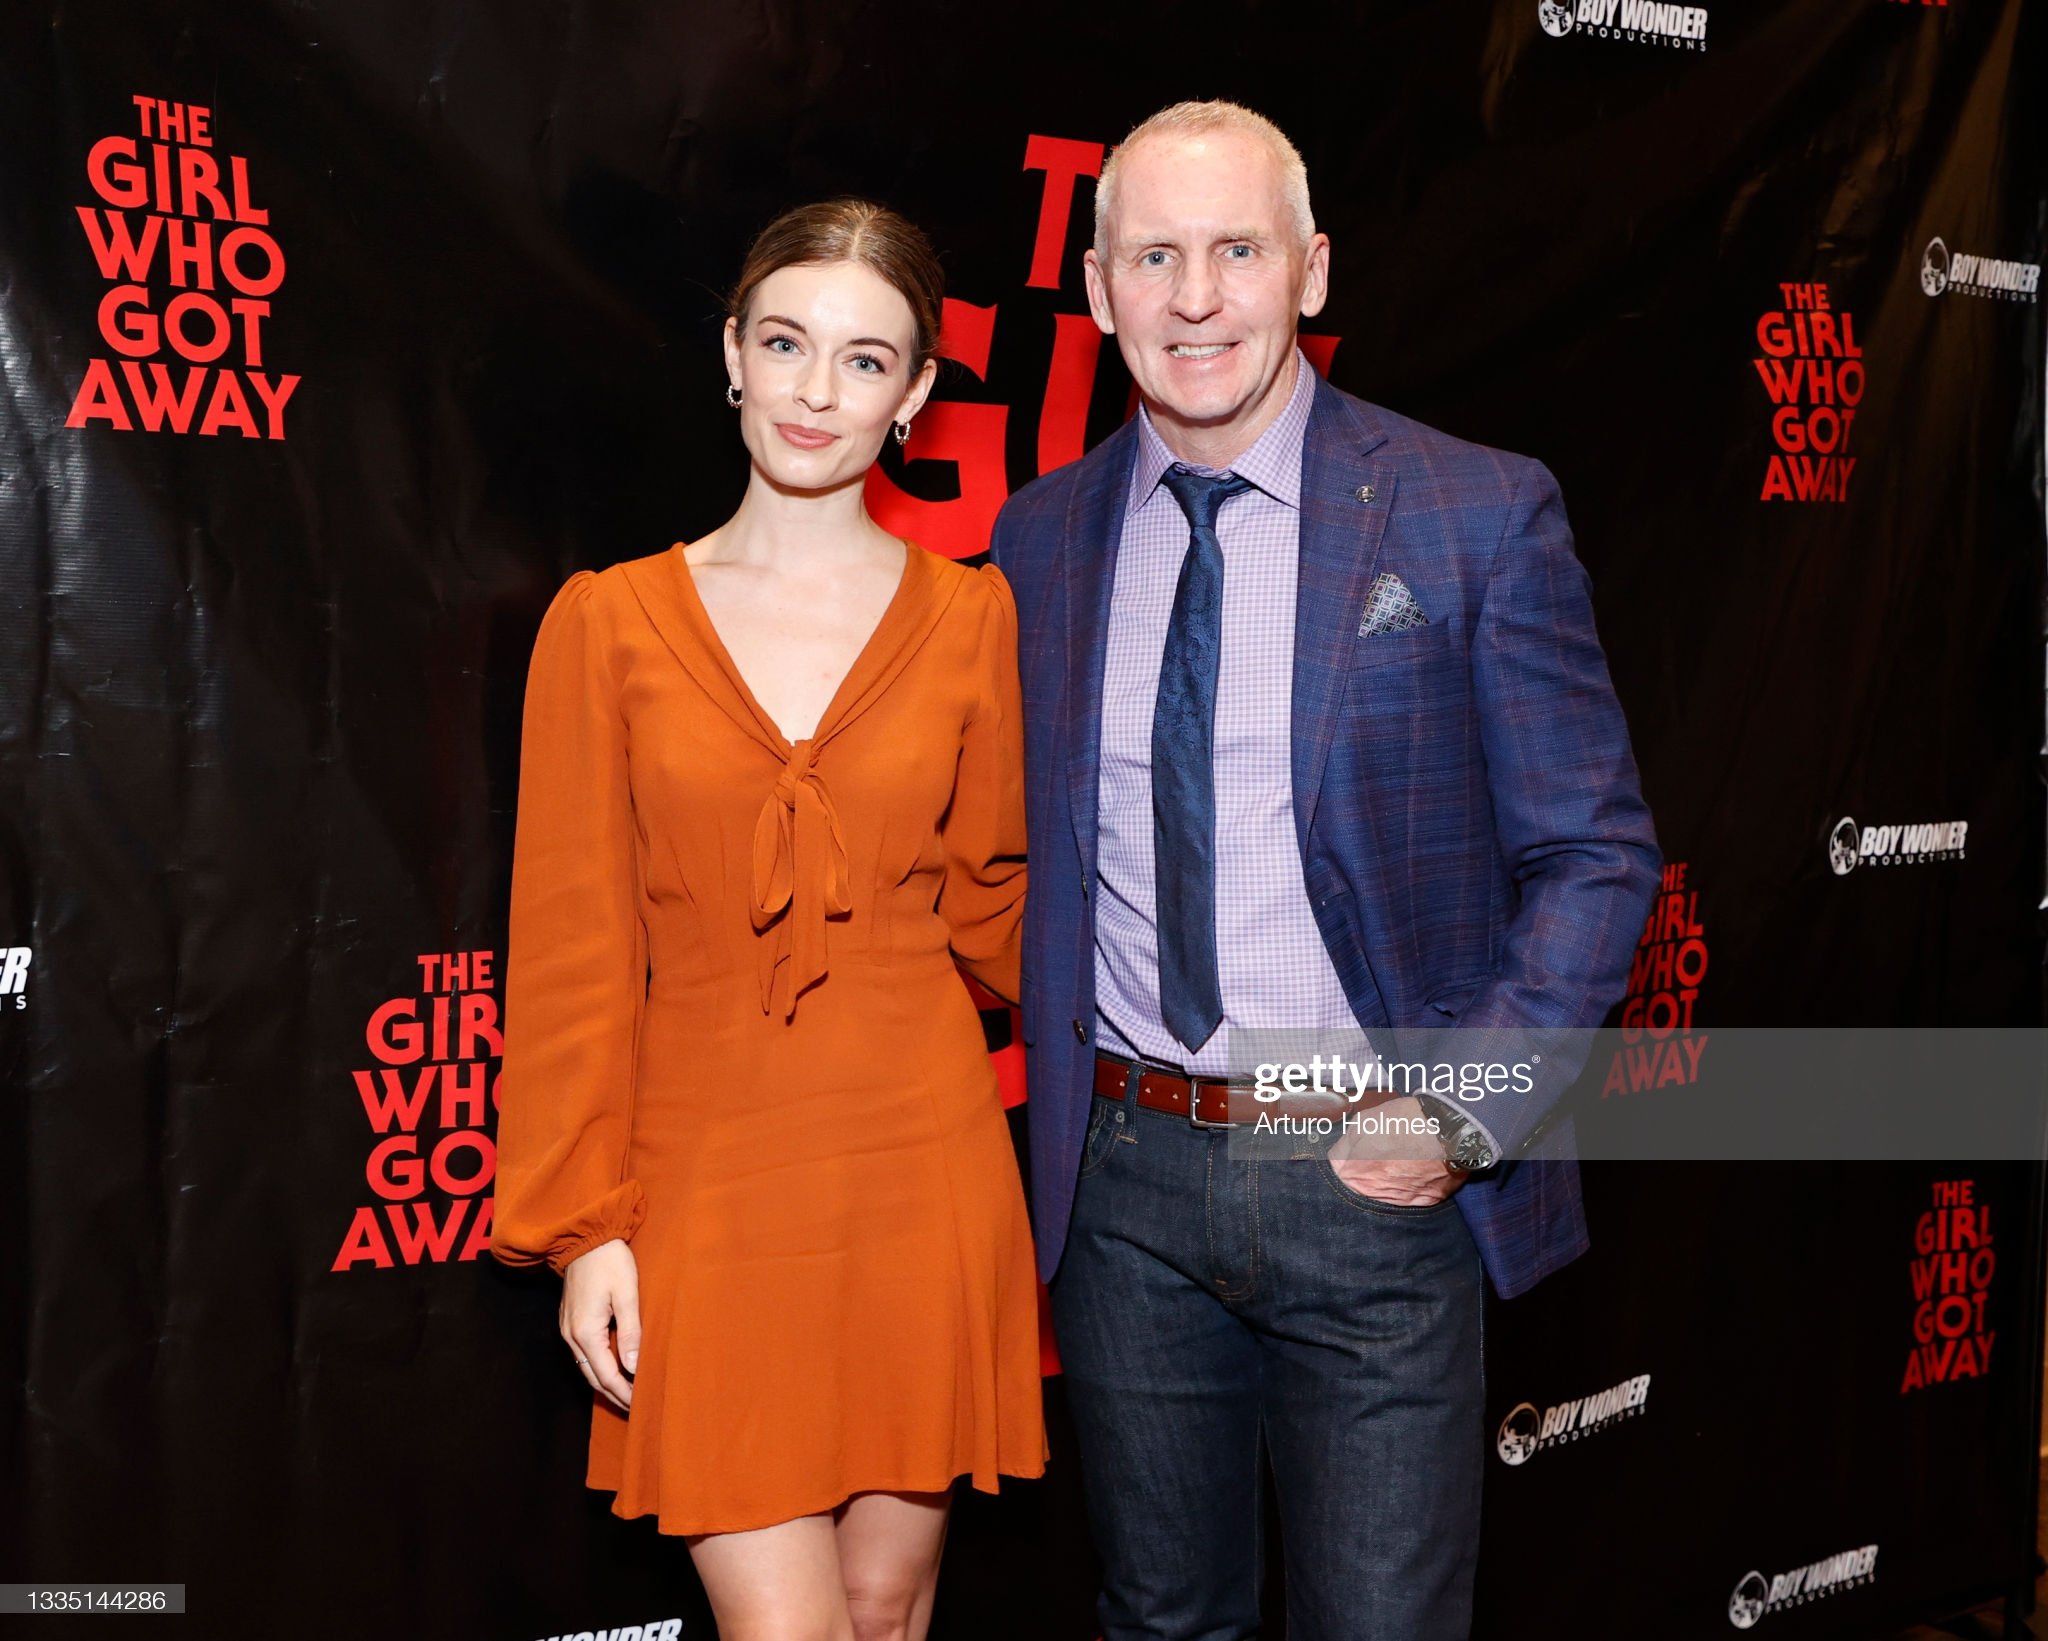 gettyimages-1335144286-2048x2048.jpg